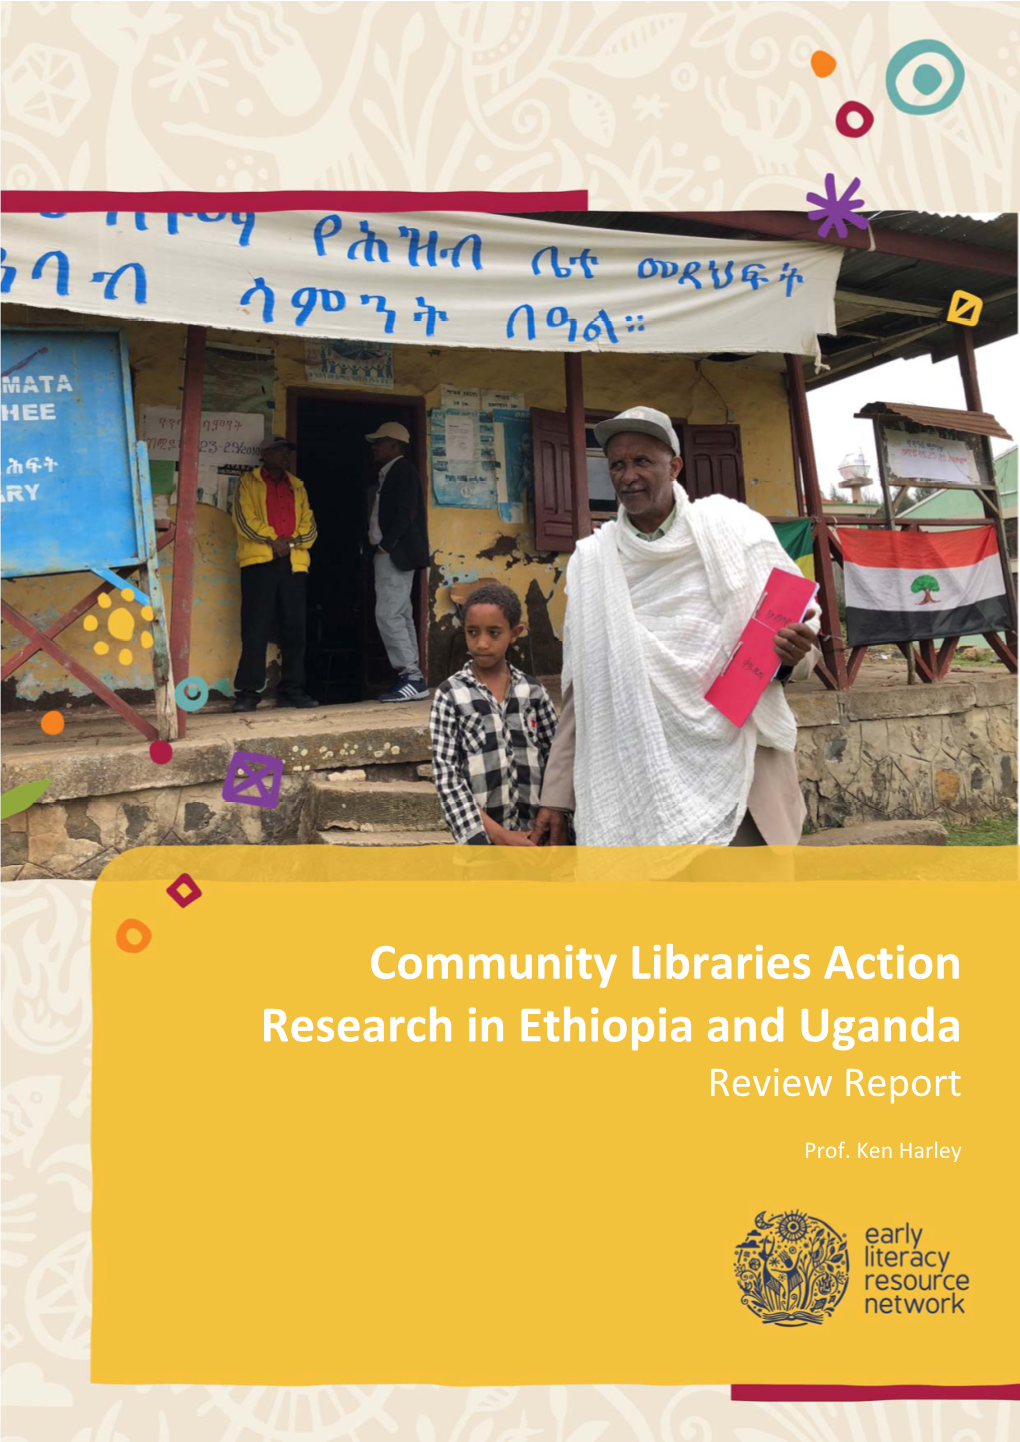 Community Libraries Action Research in Ethiopia and Uganda Review Report